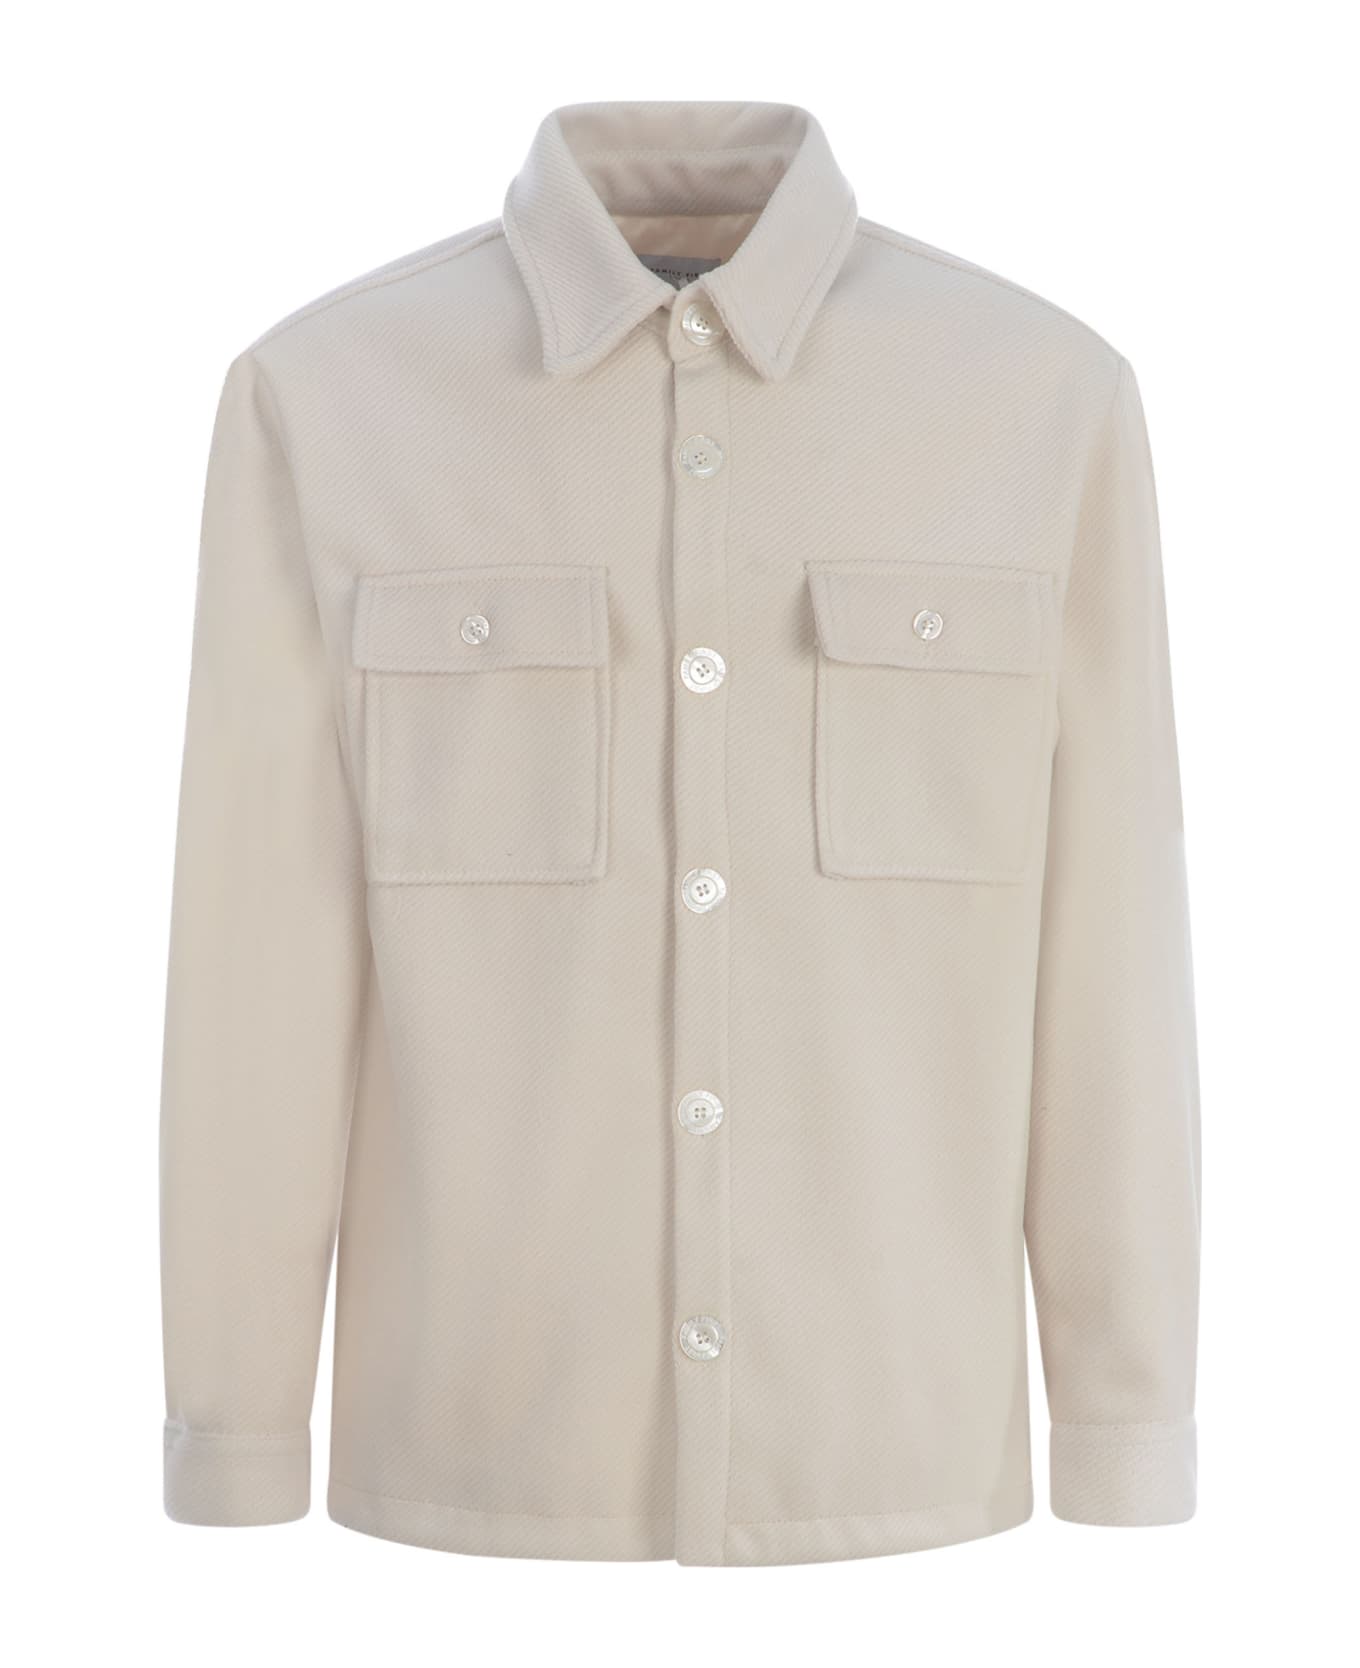 Family First Milano Shirt Jacket Family First In Terry Fabric - Crema